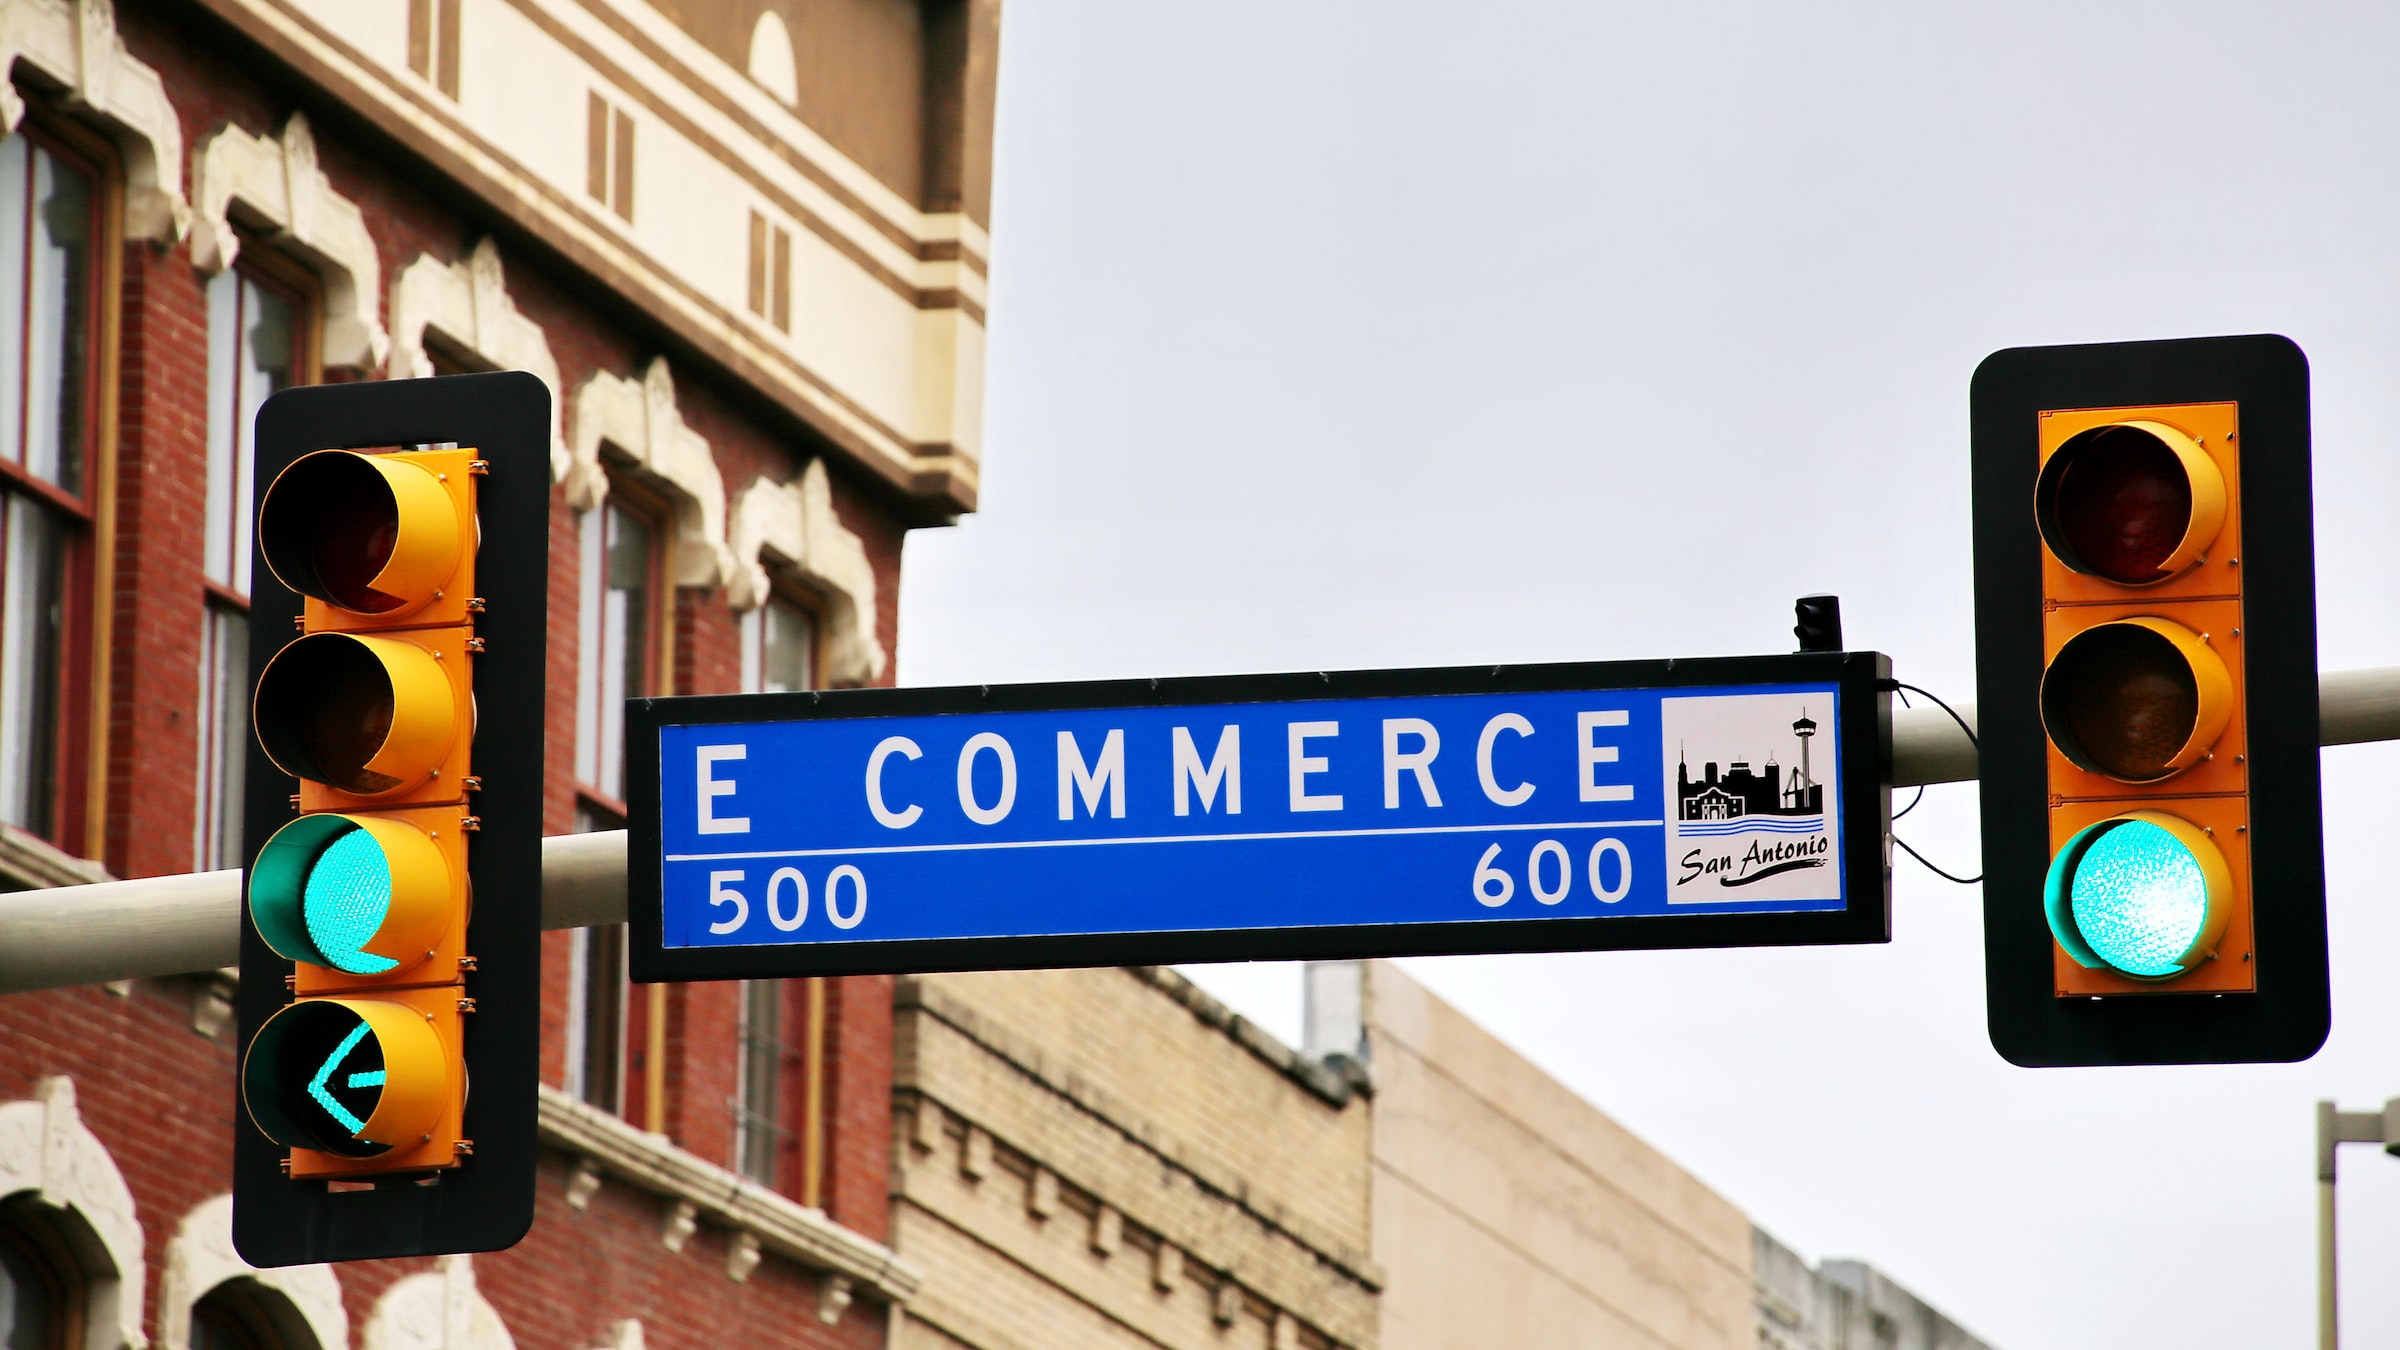 Traffic signal with a ecommerce sign